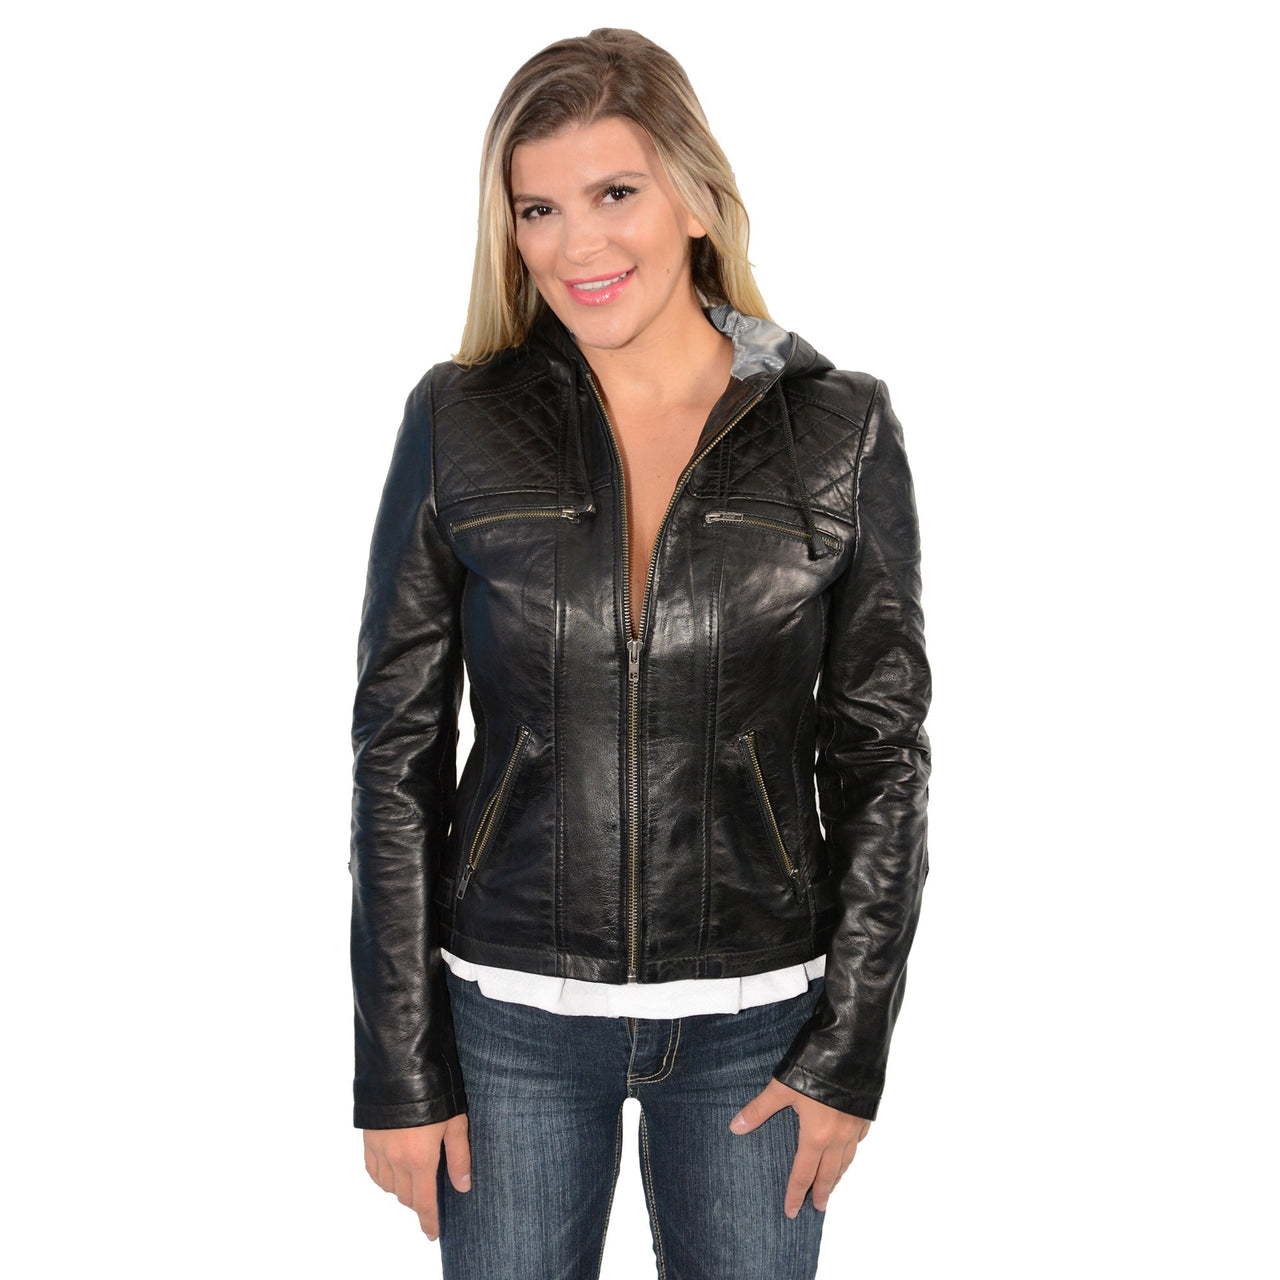 Ladies hooded scuba jacket with draw string - HighwayLeather